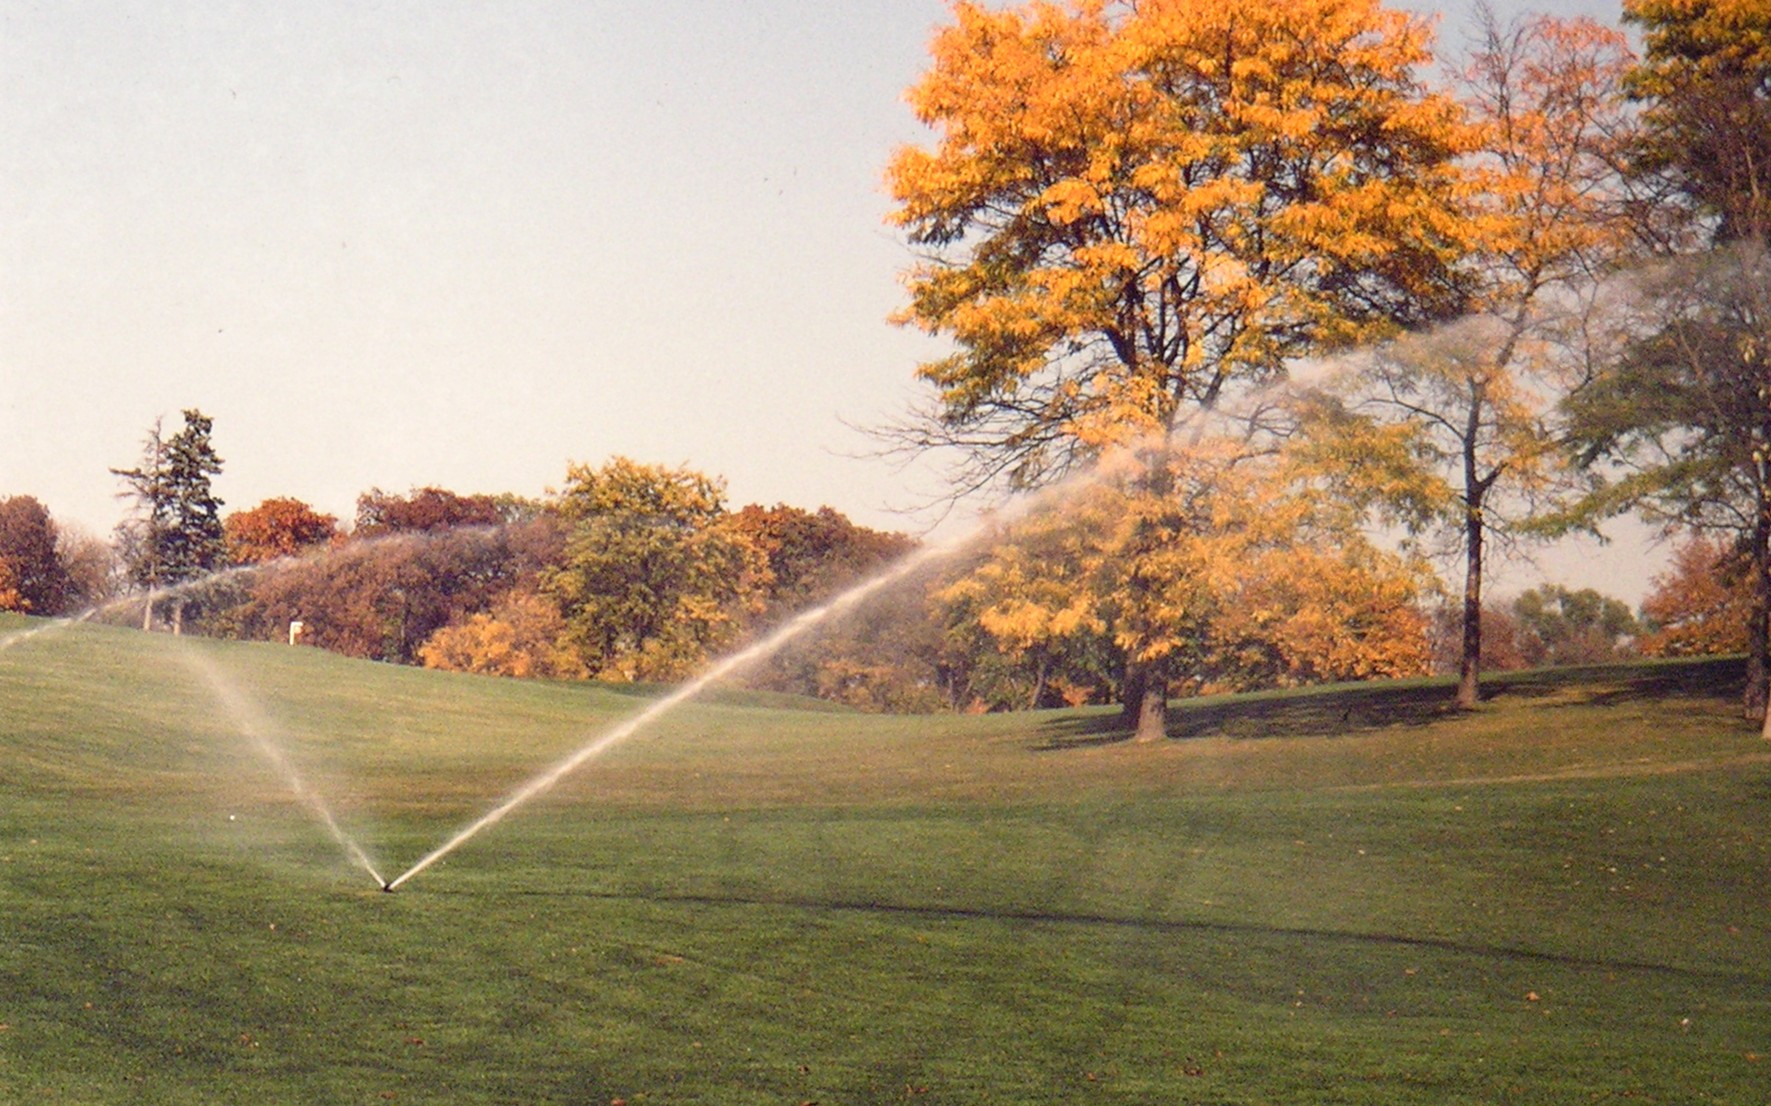 sprinklers on golf course